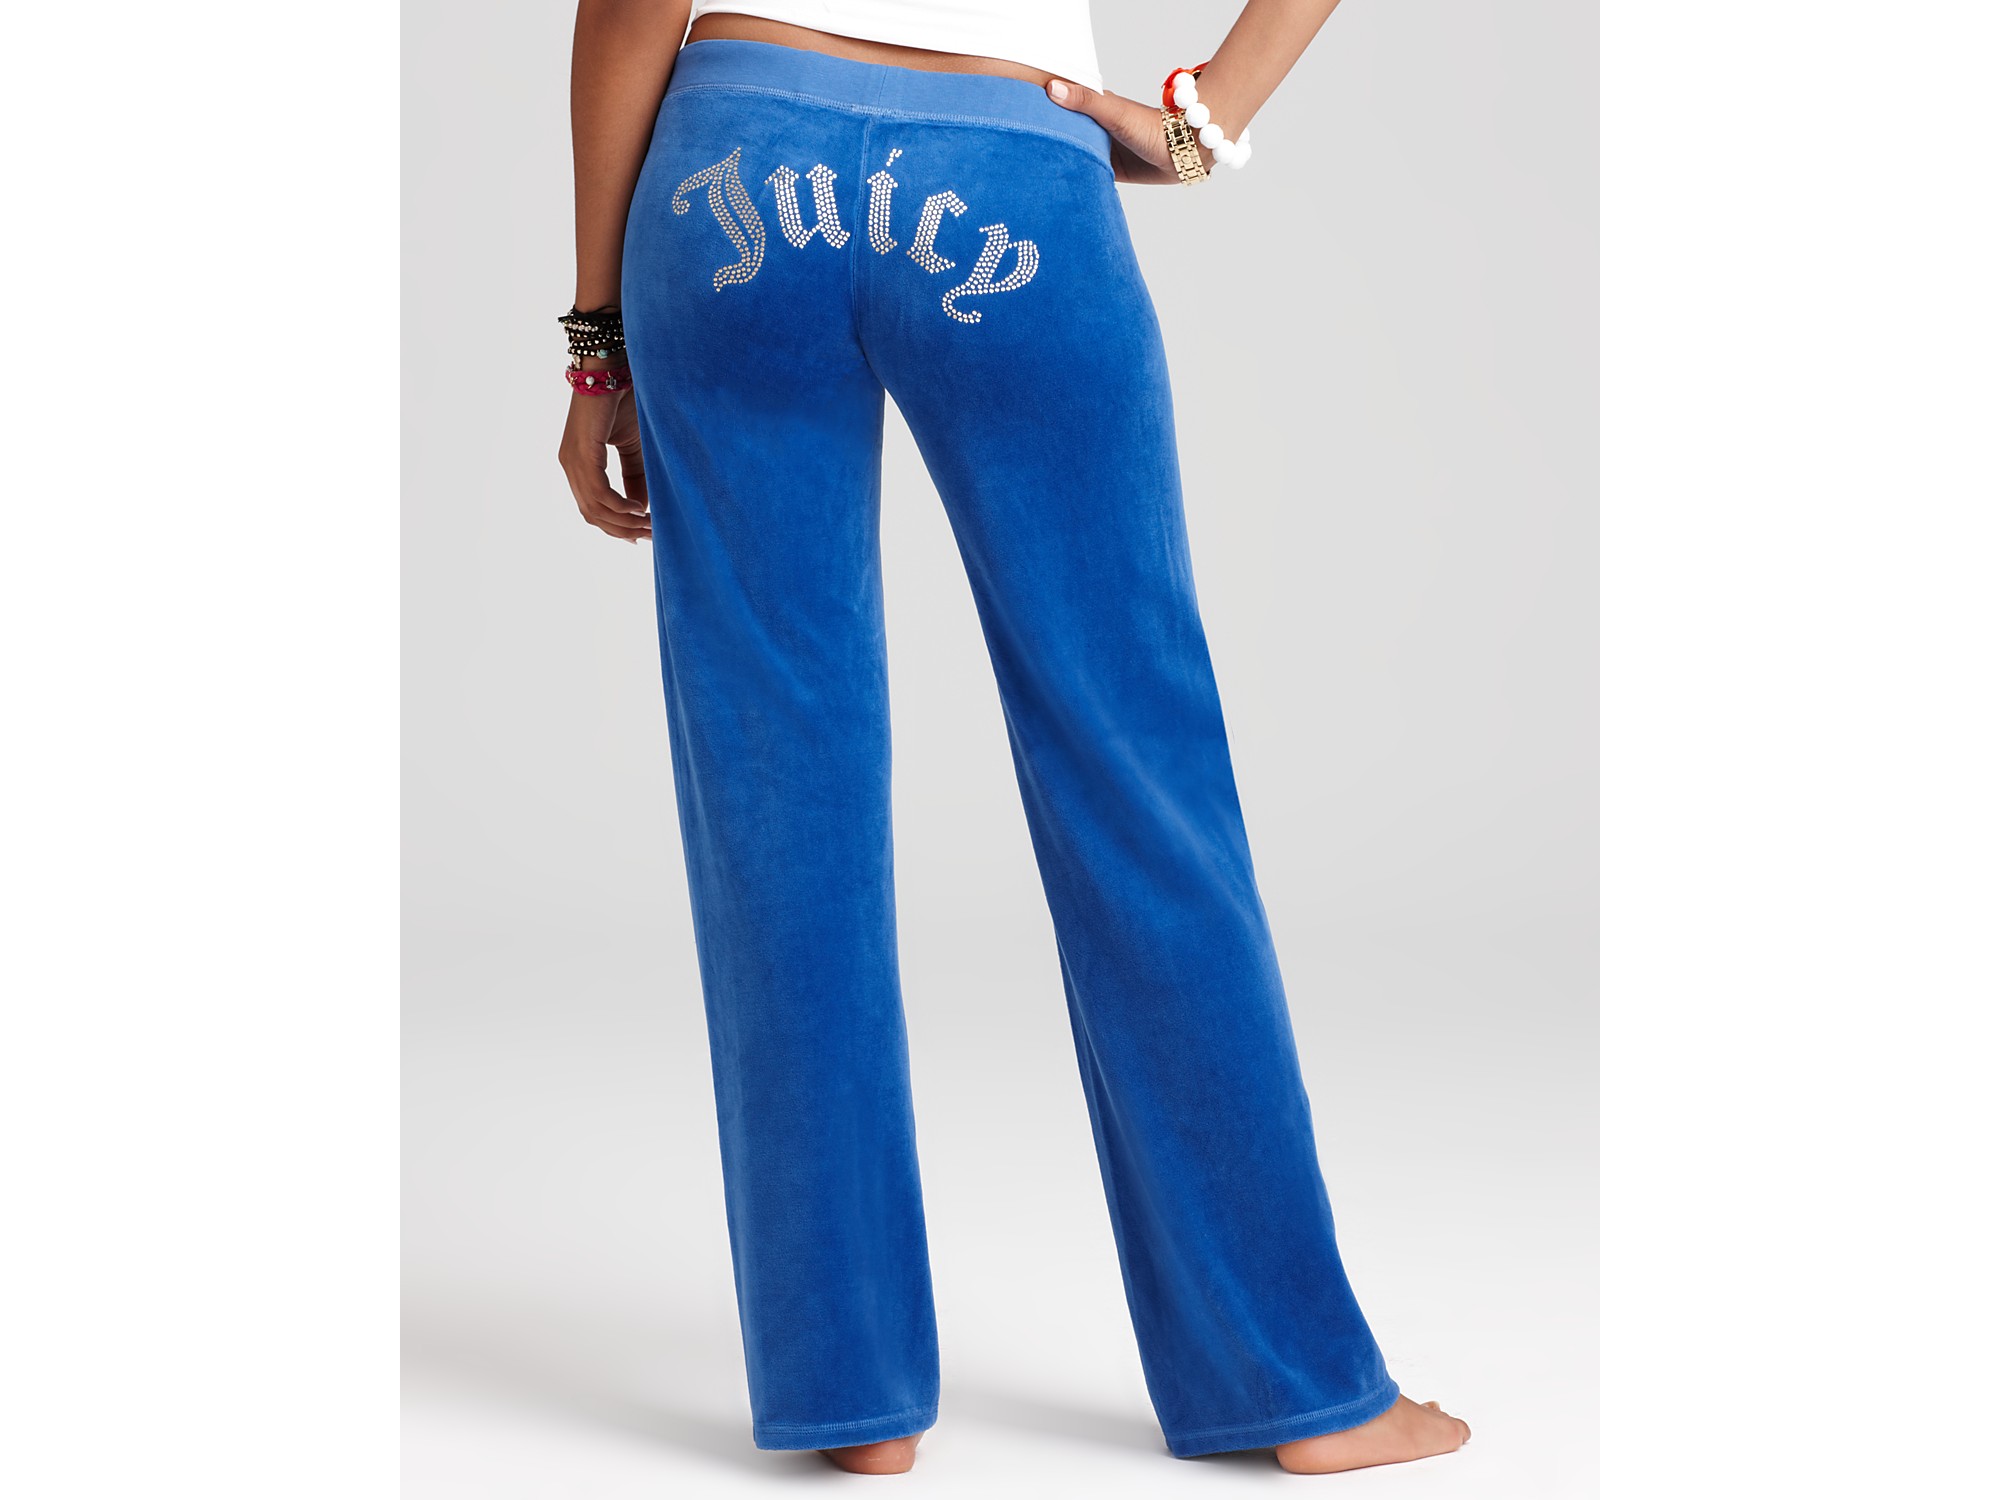 Lyst - Juicy Couture Original Leg Velour Pants with Logo in Blue